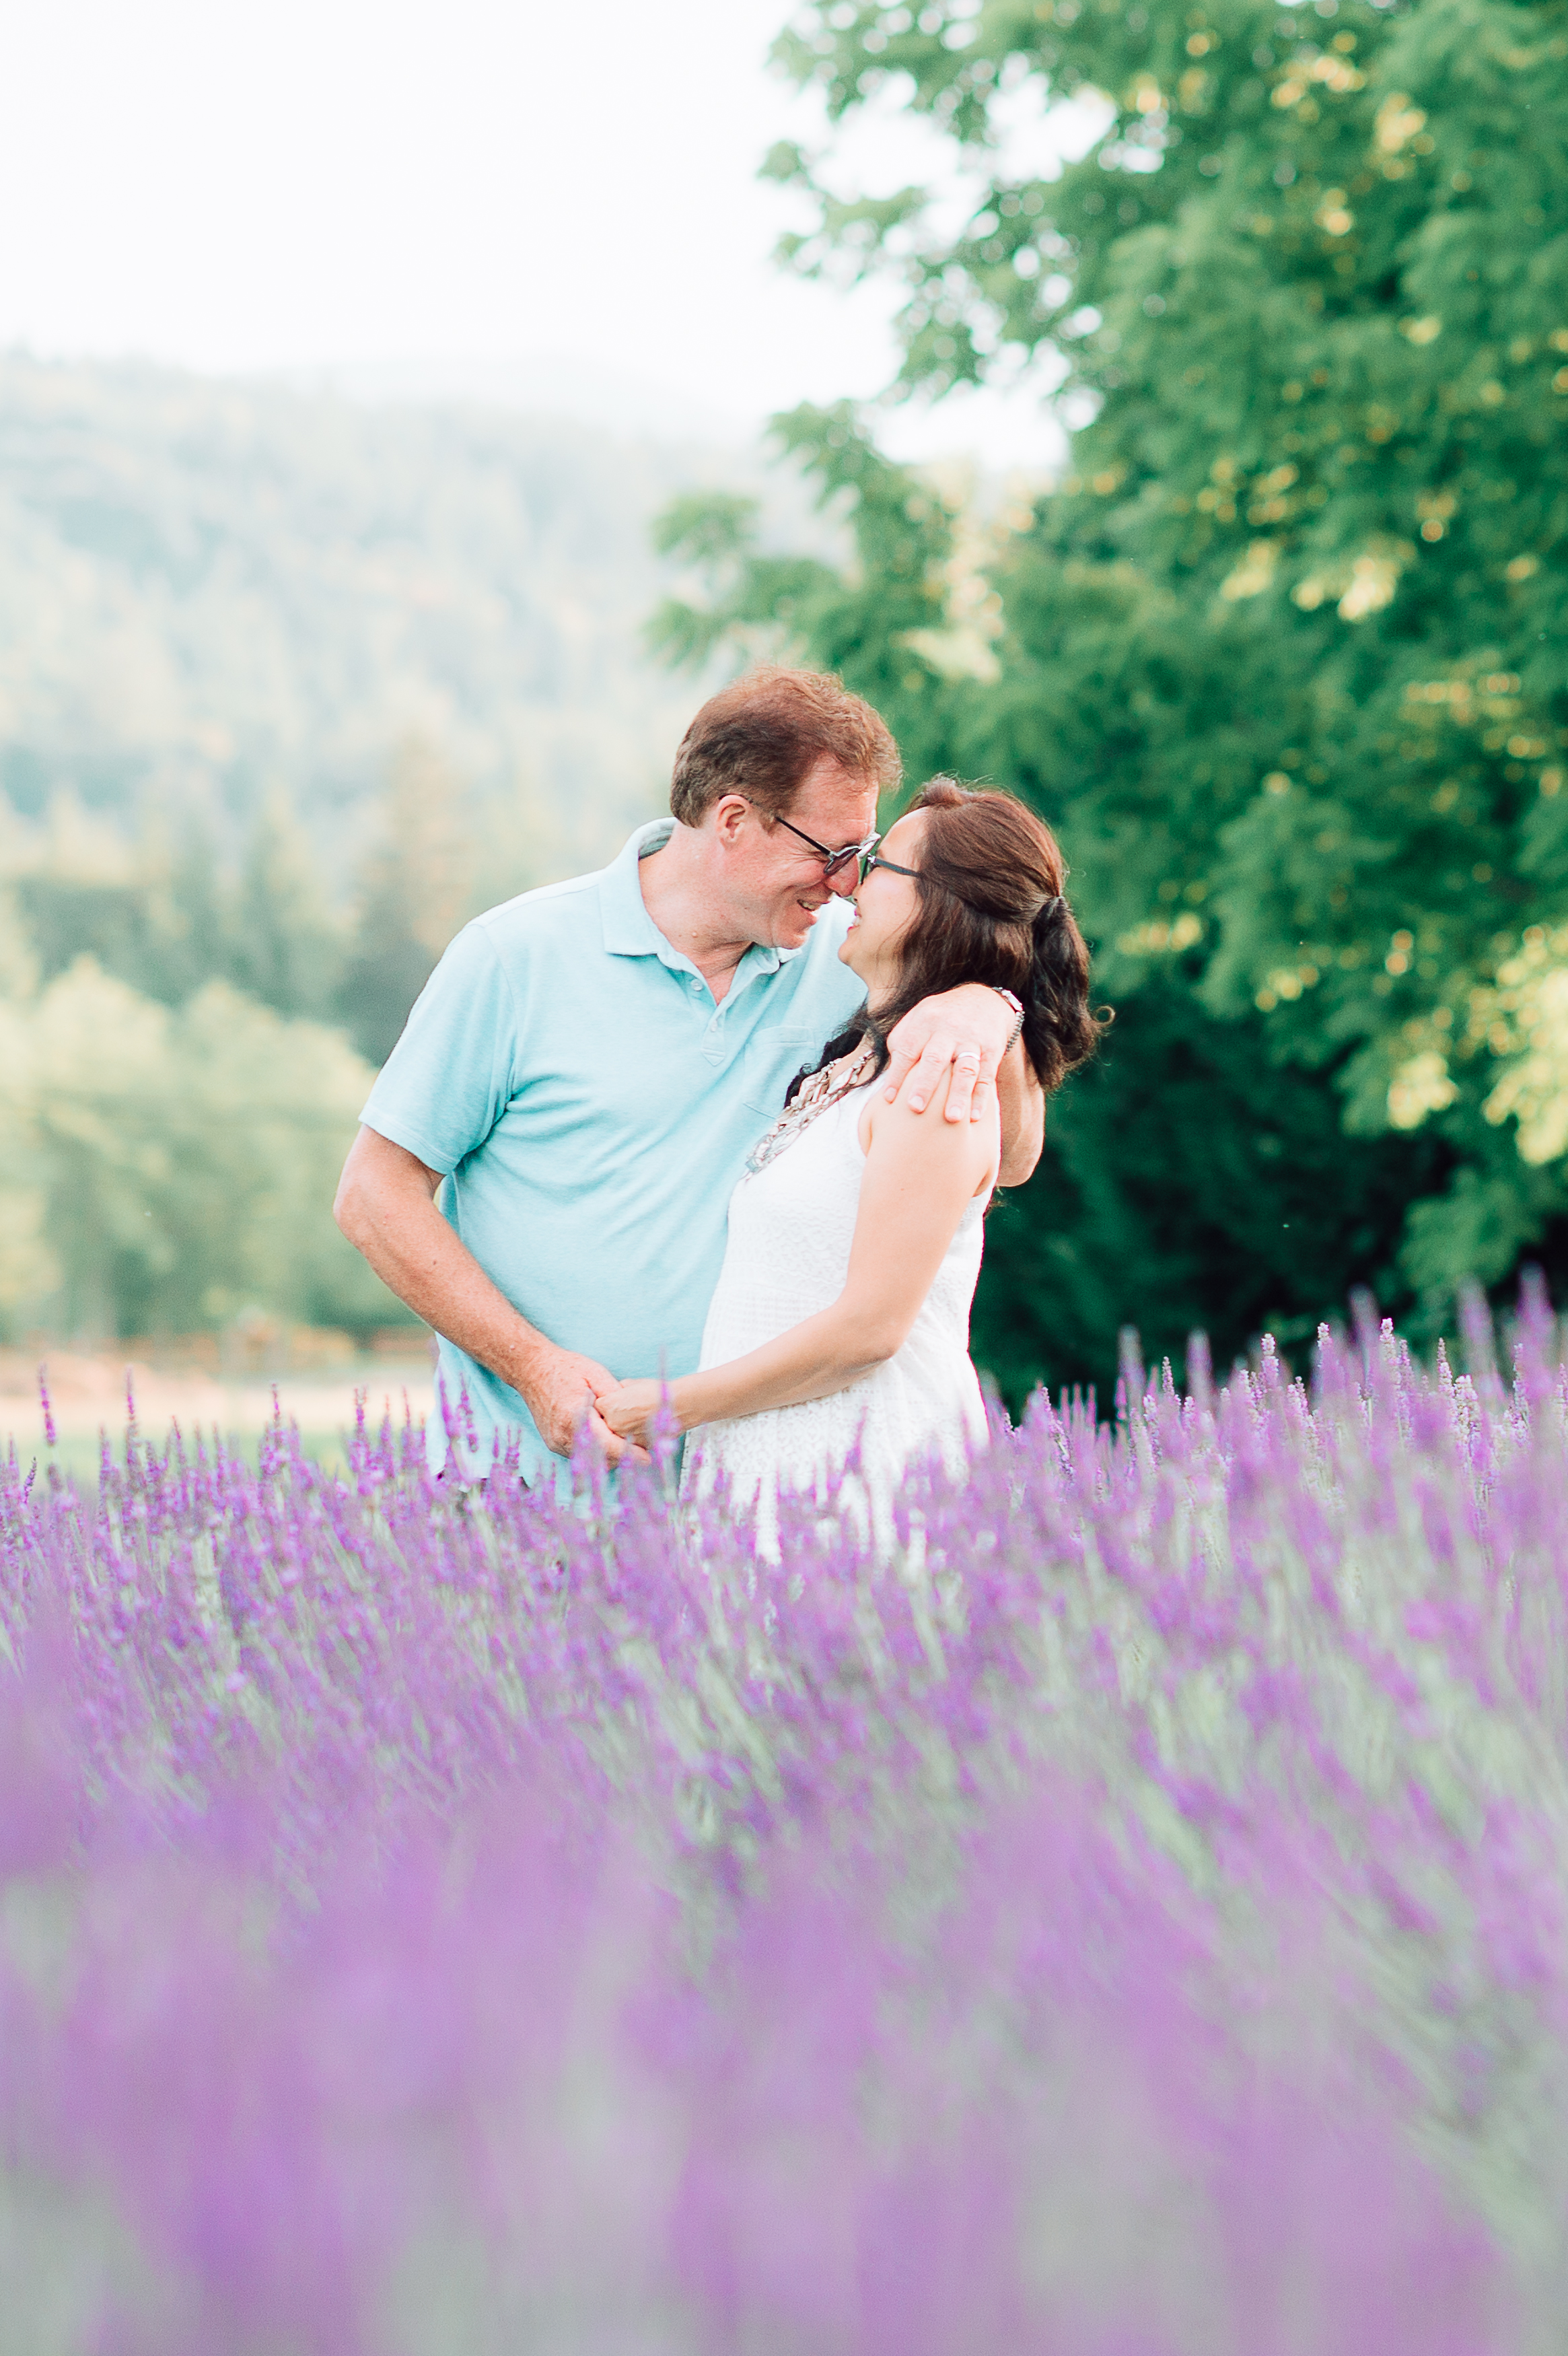 engagement_lavenderfield_youseephotography_LidiaOtto (10).jpg